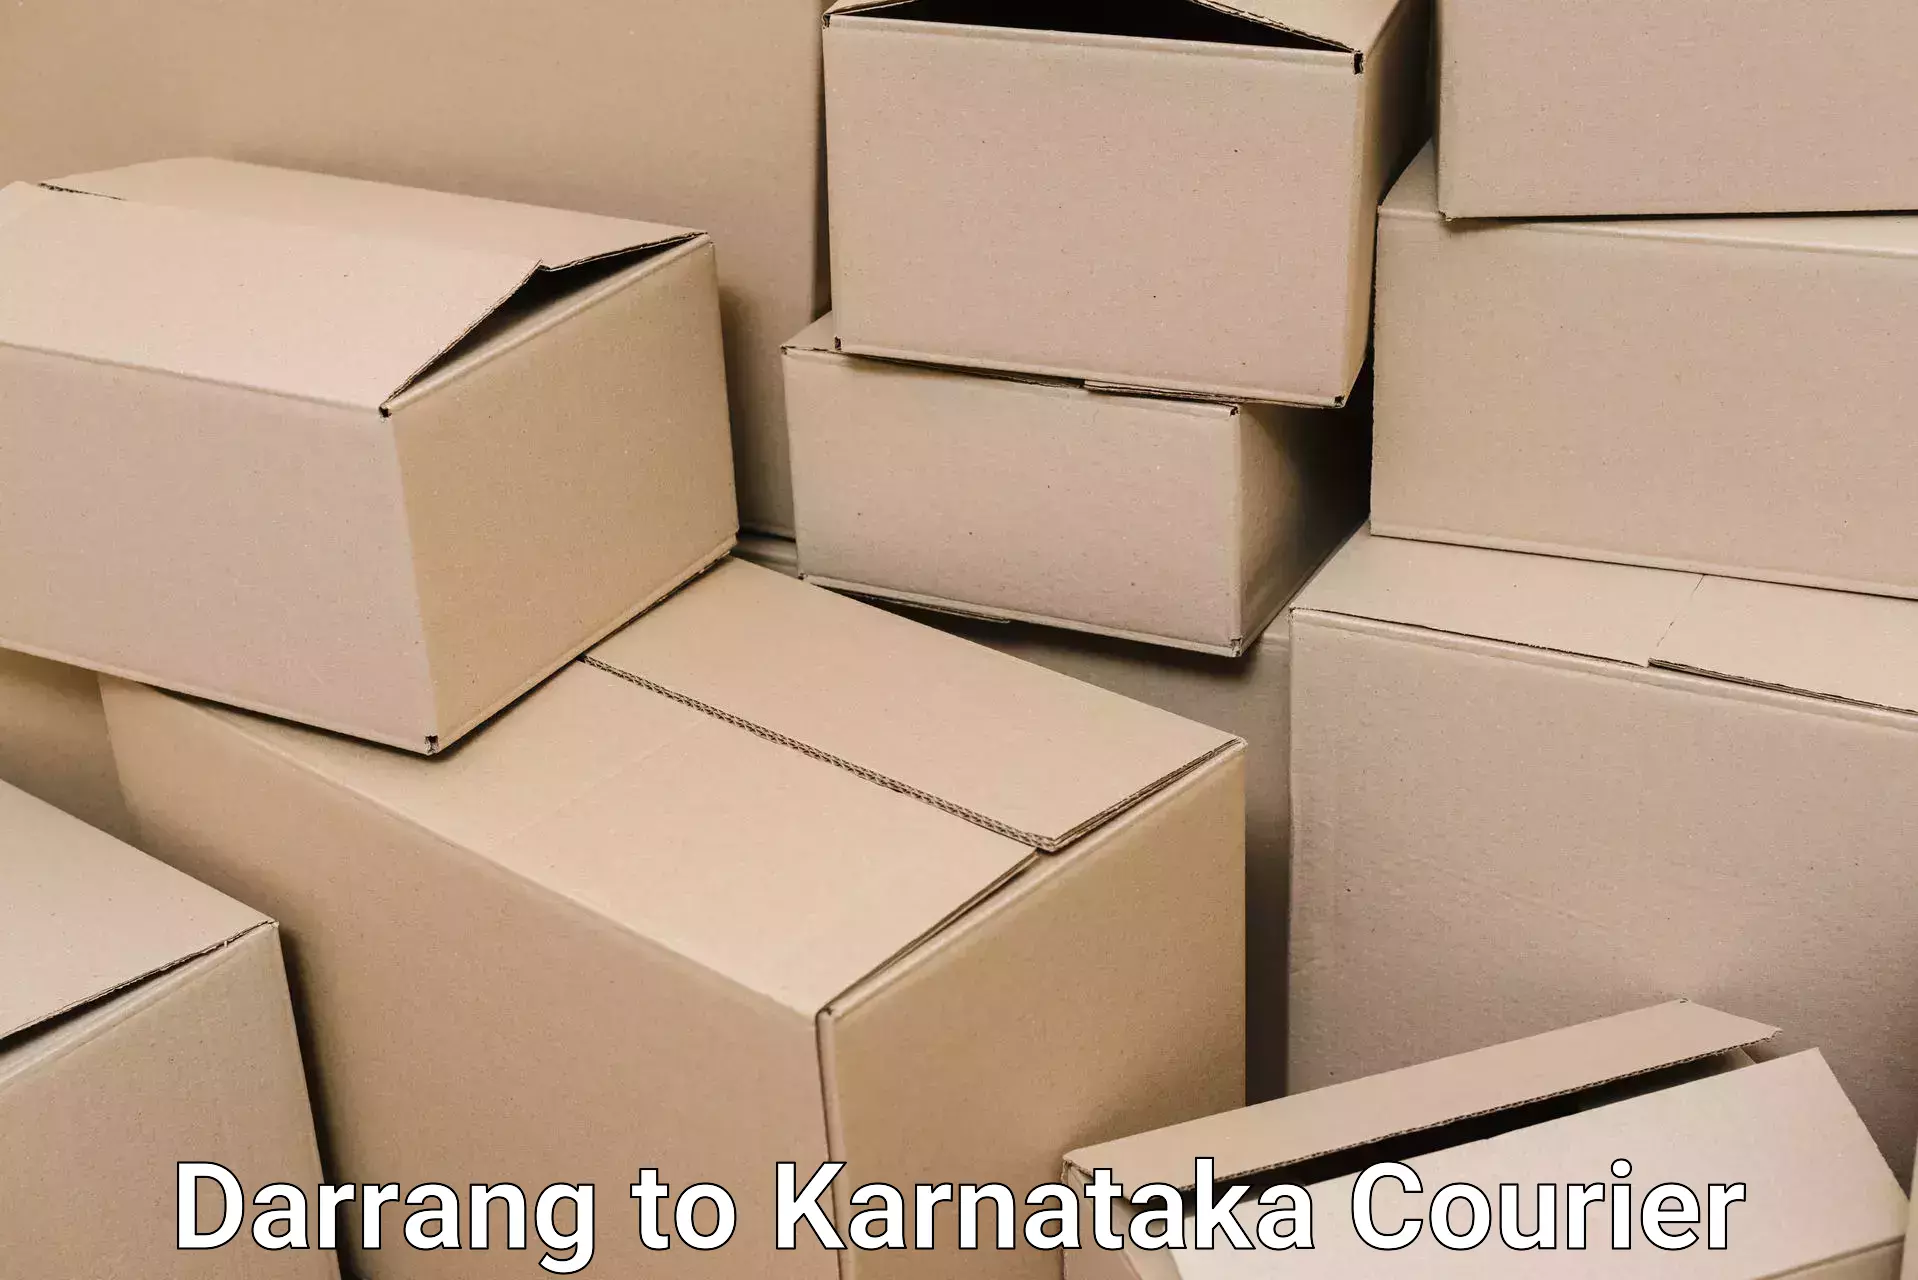 Budget-friendly movers Darrang to Belur